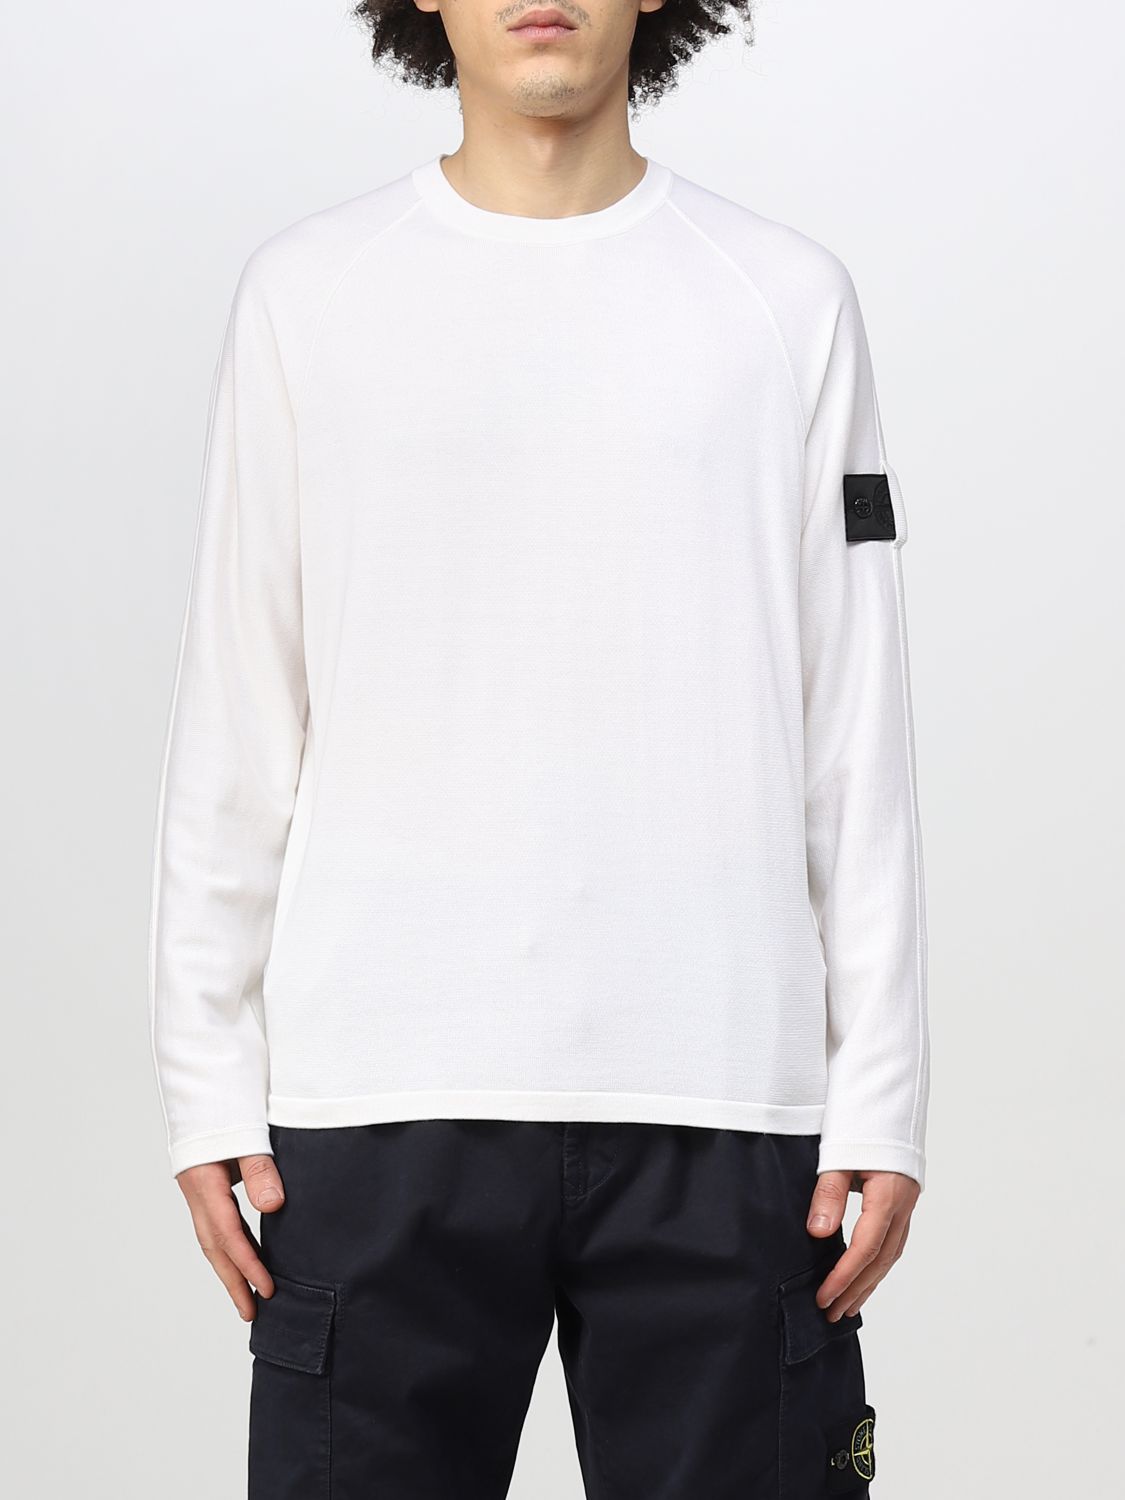 STONE ISLAND SHADOW PROJECT SWEATER STONE ISLAND SHADOW PROJECT MEN COLOR WHITE,D51158001